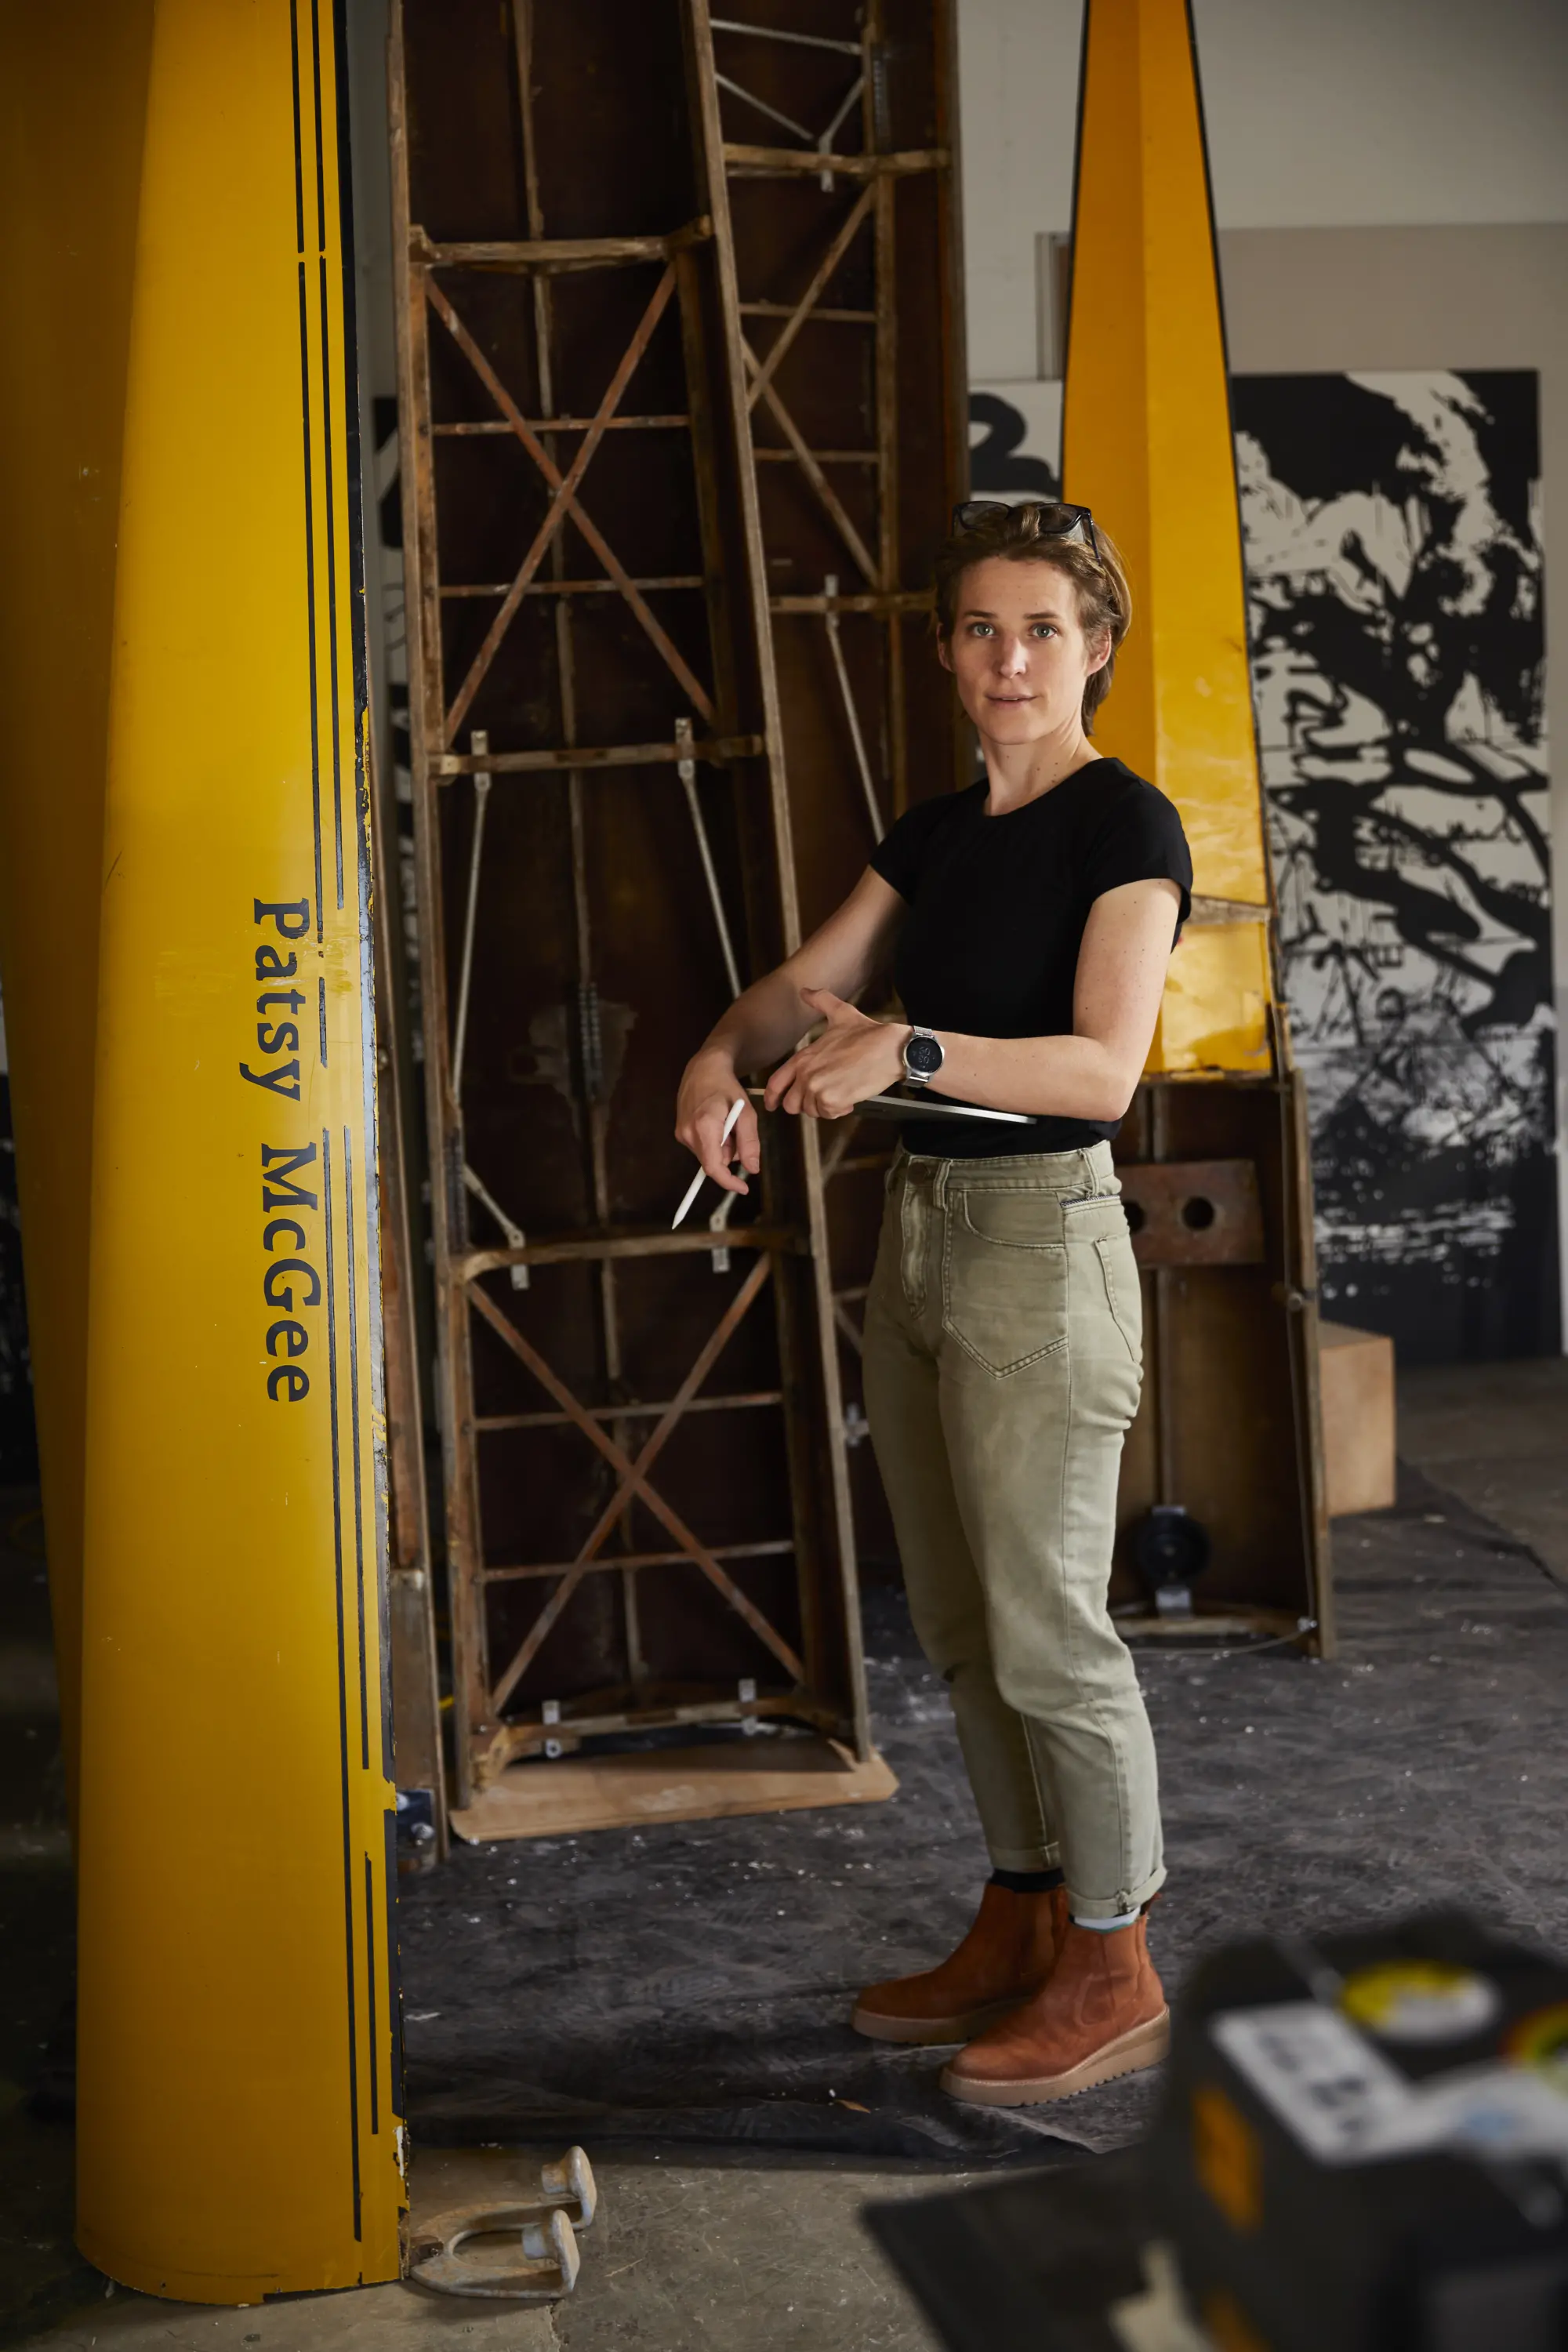 A person standing in a workshop, dressed in a black t-shirt, light green pants, brown boots, and a watch. They are holding tools and standing near a yellow structure with "Patsy McGee" written on it, and part of an unidentified yellow structure are visible in the background.